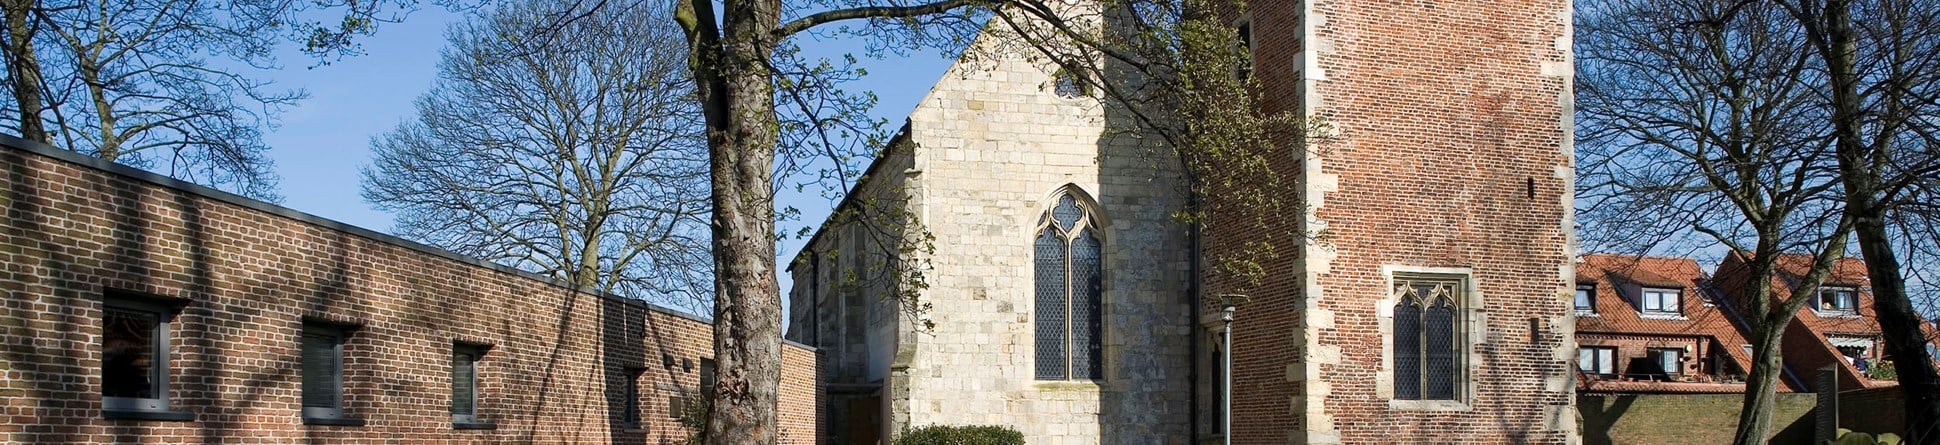 Image of the exterior of the National Centre for Early Music showing the medieval church of St Margaret, Walmgate, and the new extension.